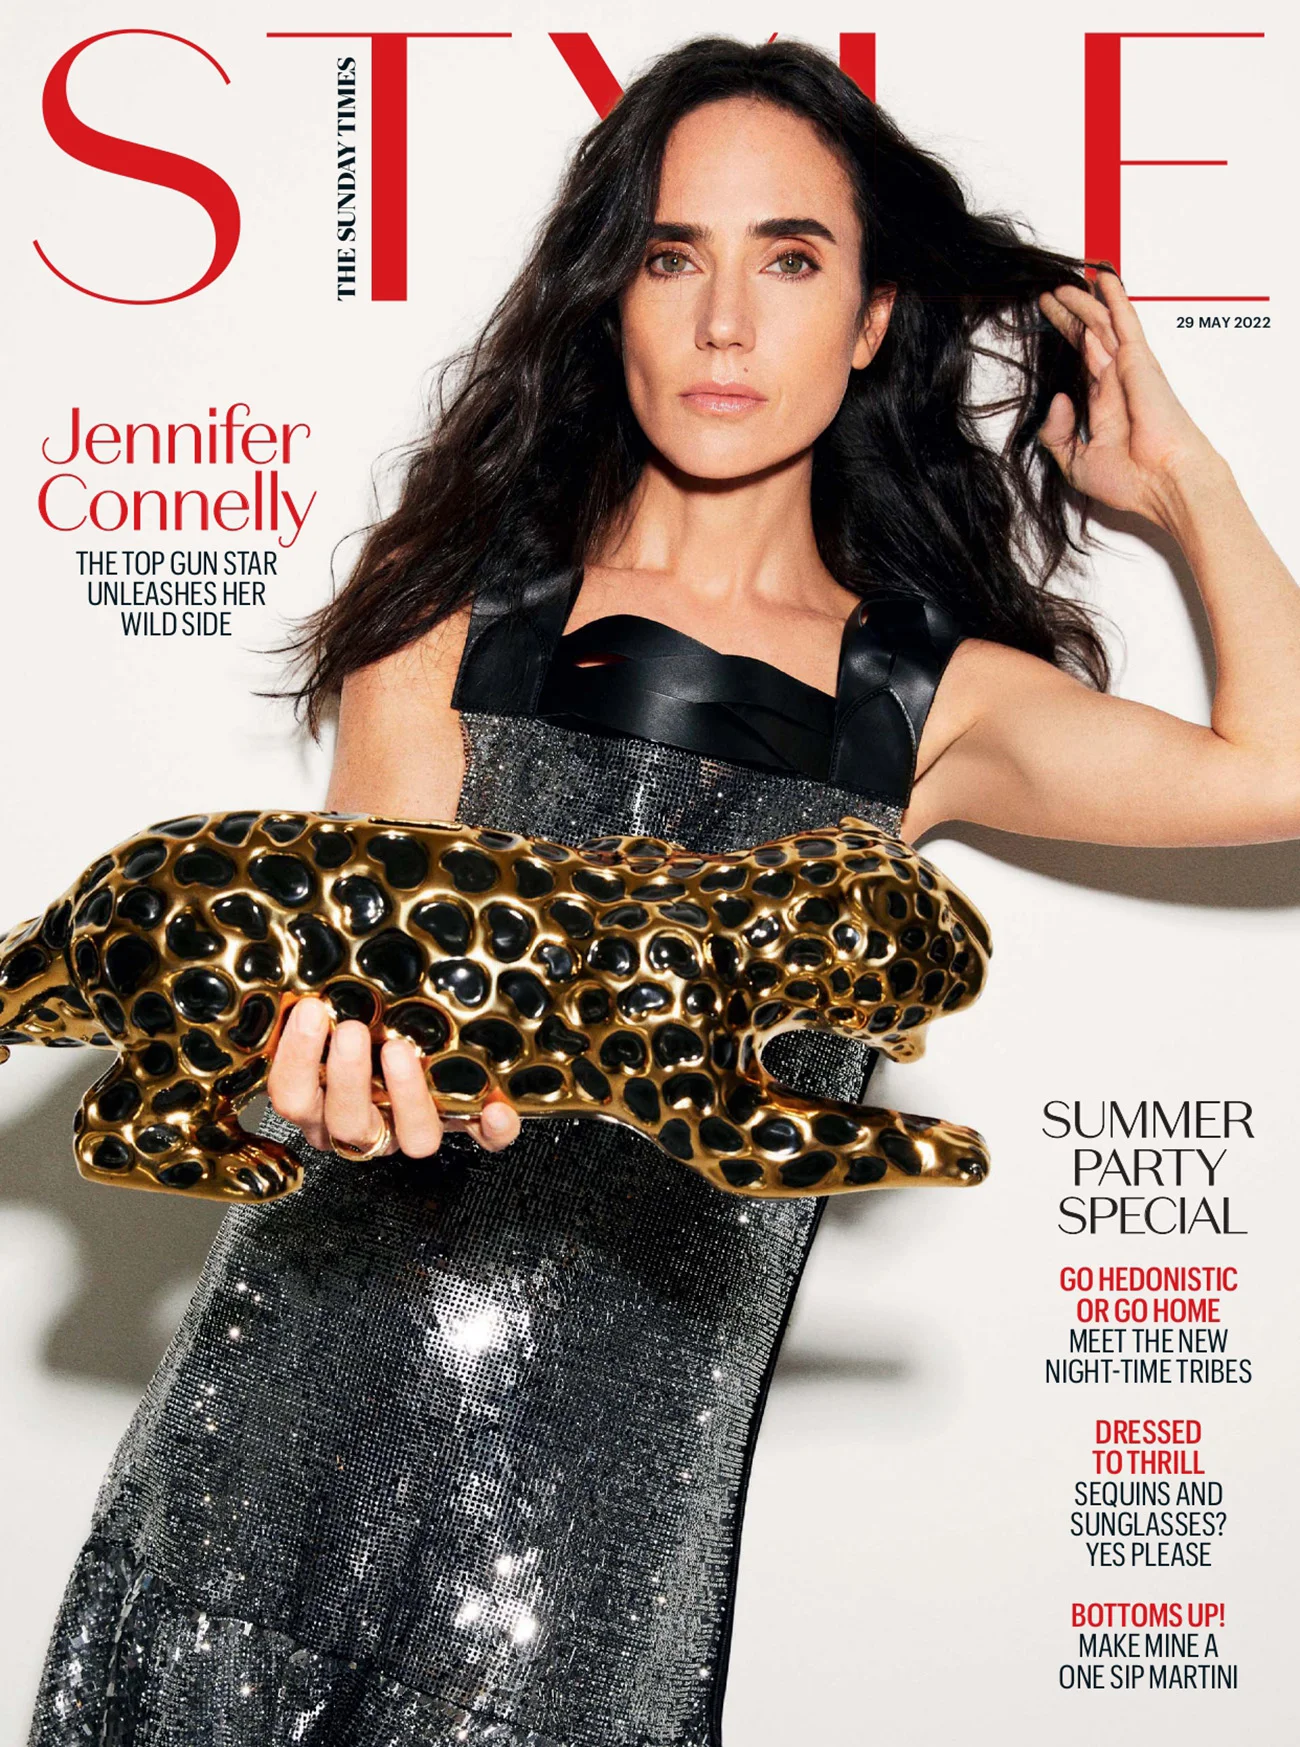 Jennifer Connelly covers The Sunday Times Style May 29th, 2022 by Carin  Backoff - fashionotography